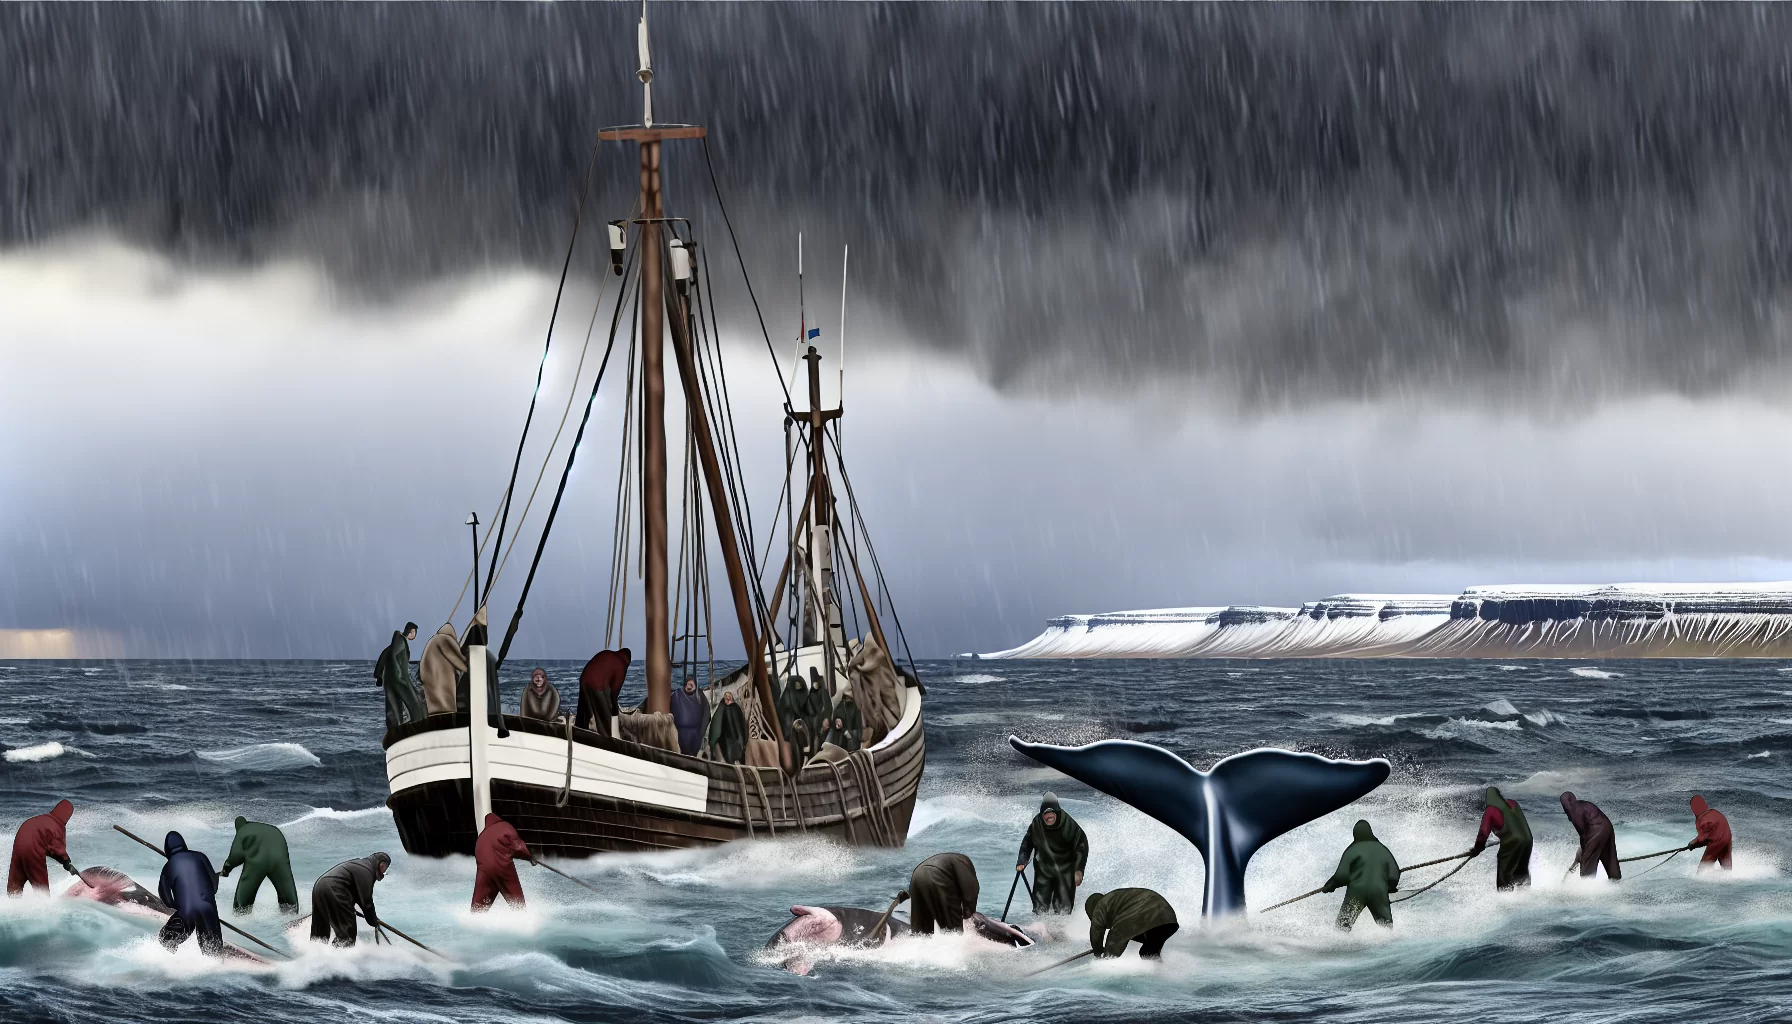 Iceland's controversial return to whale hunting: a deep dive into the crisis